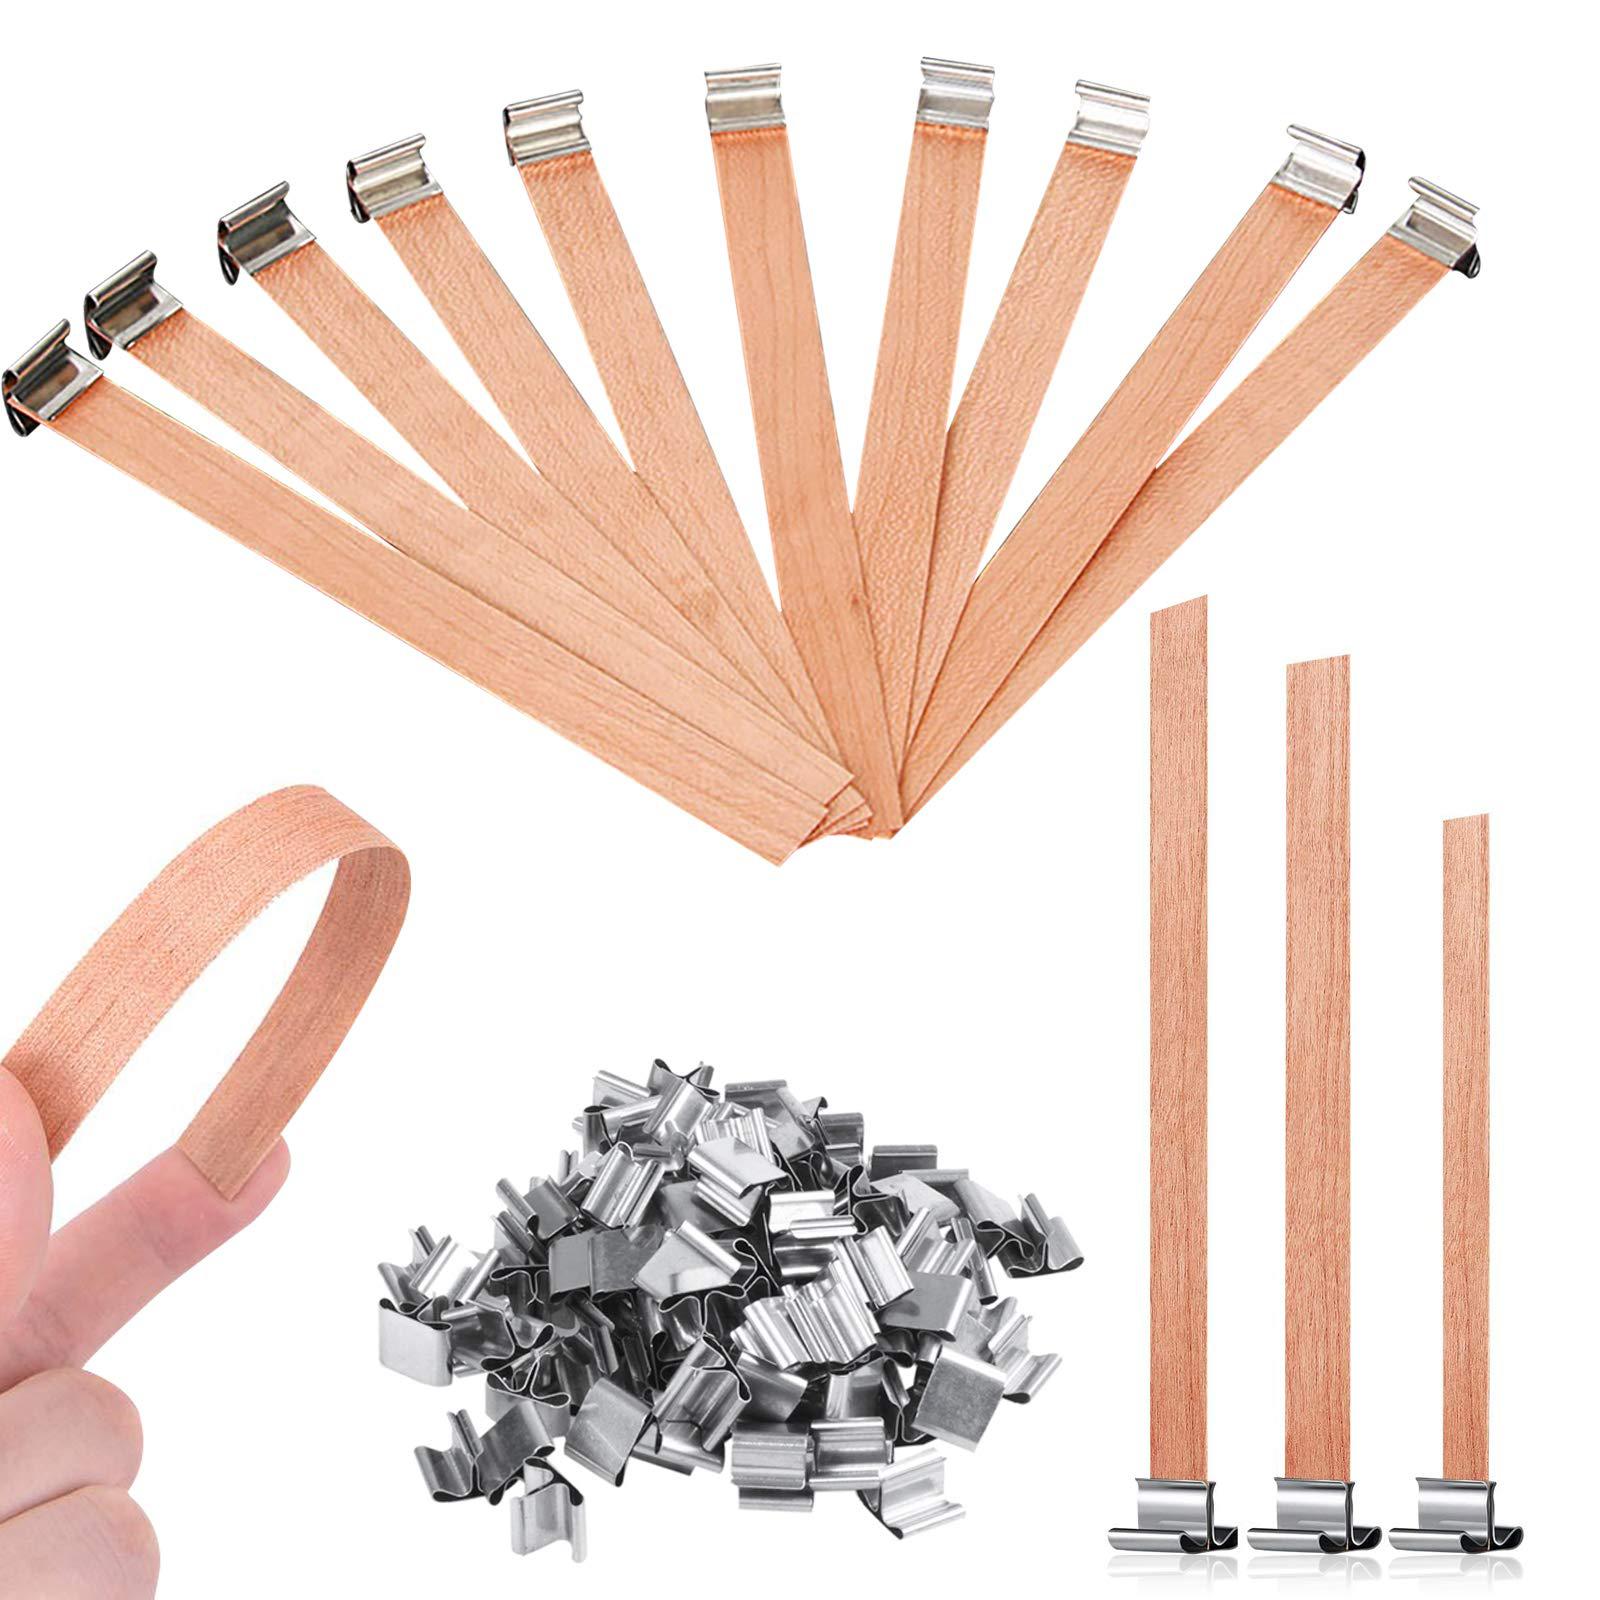 foxnsk candle wicks 60 pieces natural wood candle wicks thick wooden candle  wick cores with iron stands wick for candle makin